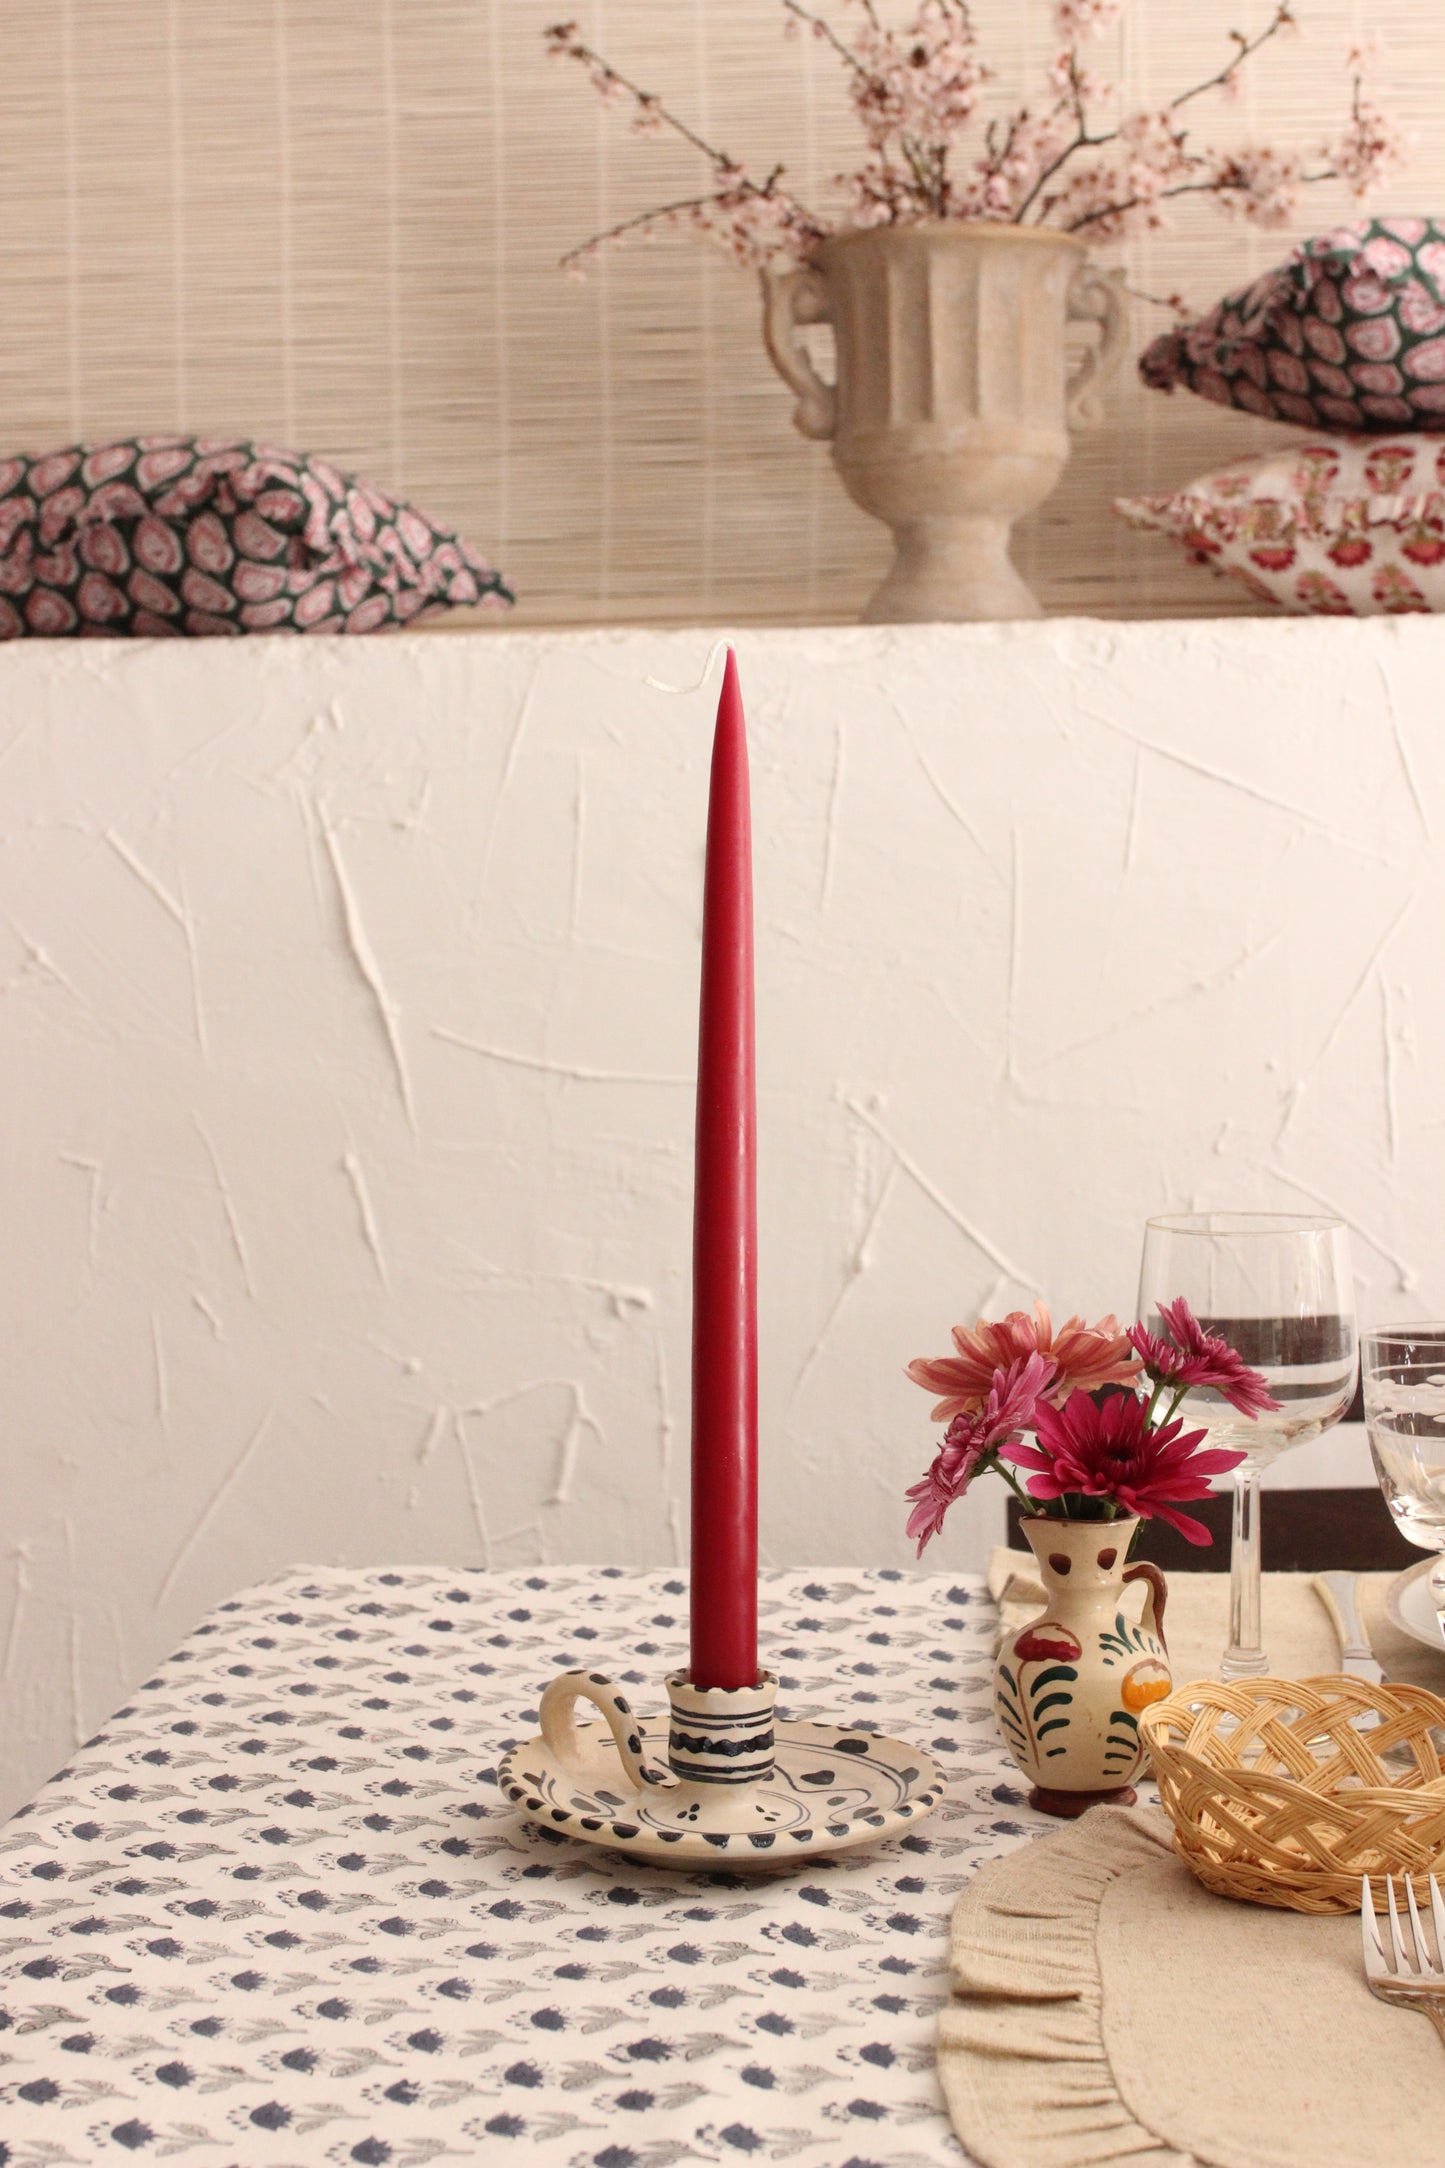 SET OF 2 TALL CONICAL BURGUNDY RED CANDLES